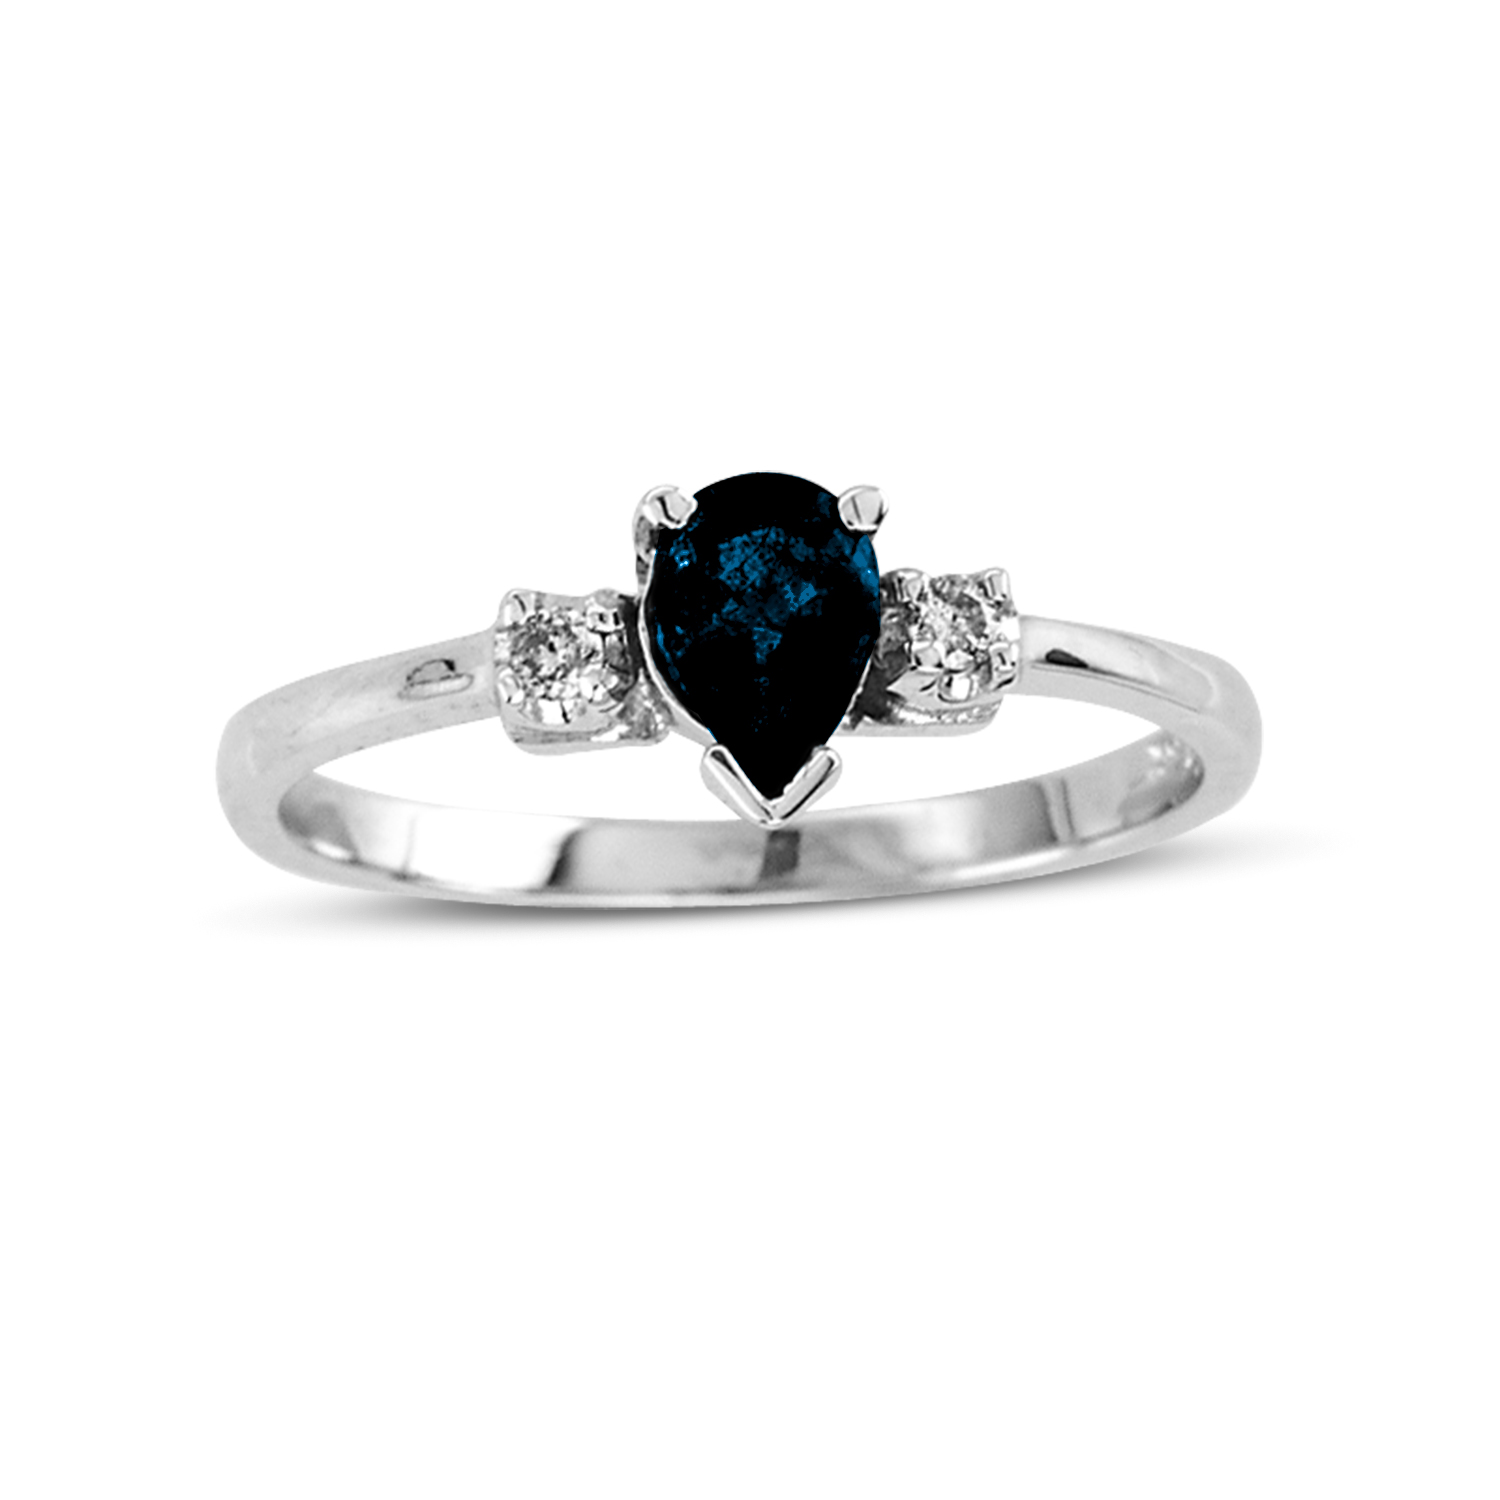 0.51cttw Diamond and Pear Shaped Sapphire Ring set in 14k Gold